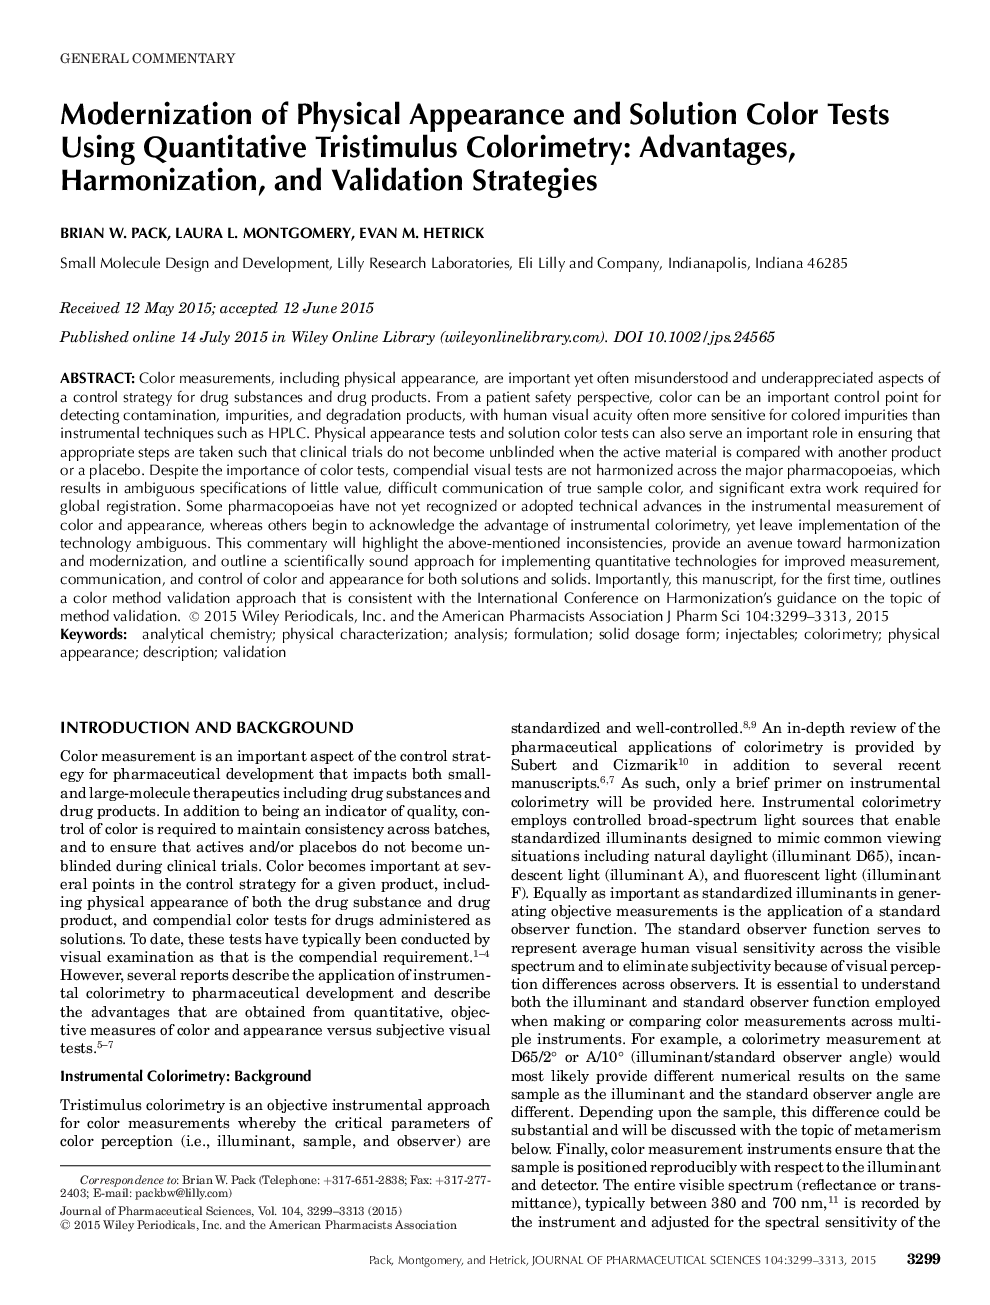 Modernization of Physical Appearance and Solution Color Tests Using Quantitative Tristimulus Colorimetry: Advantages, Harmonization, and Validation Strategies